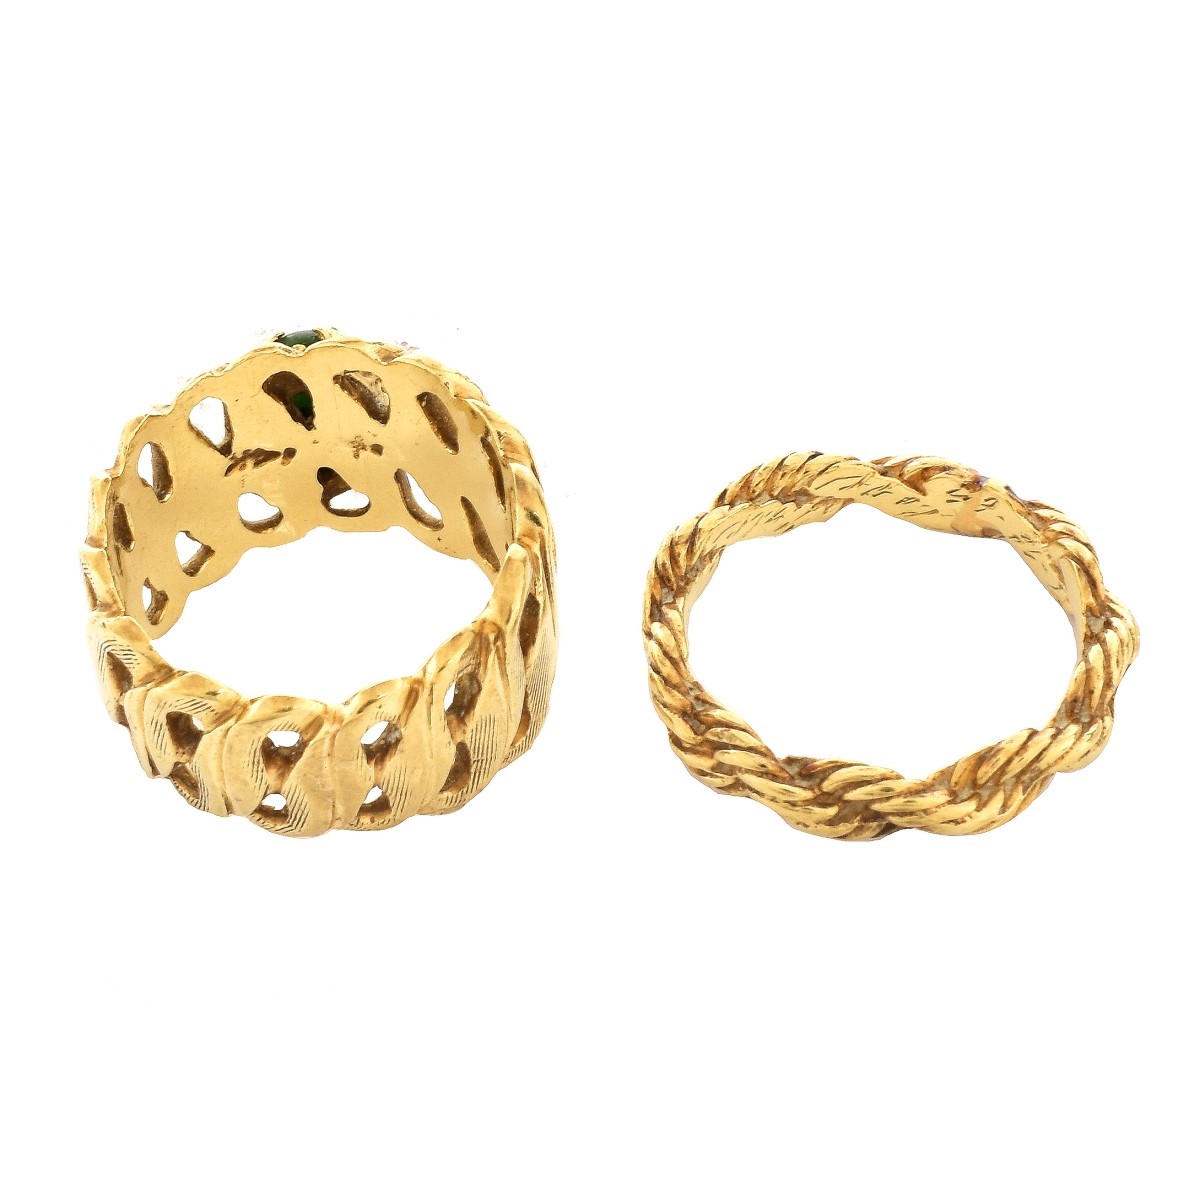 Two Vintage 14K Gold Rings